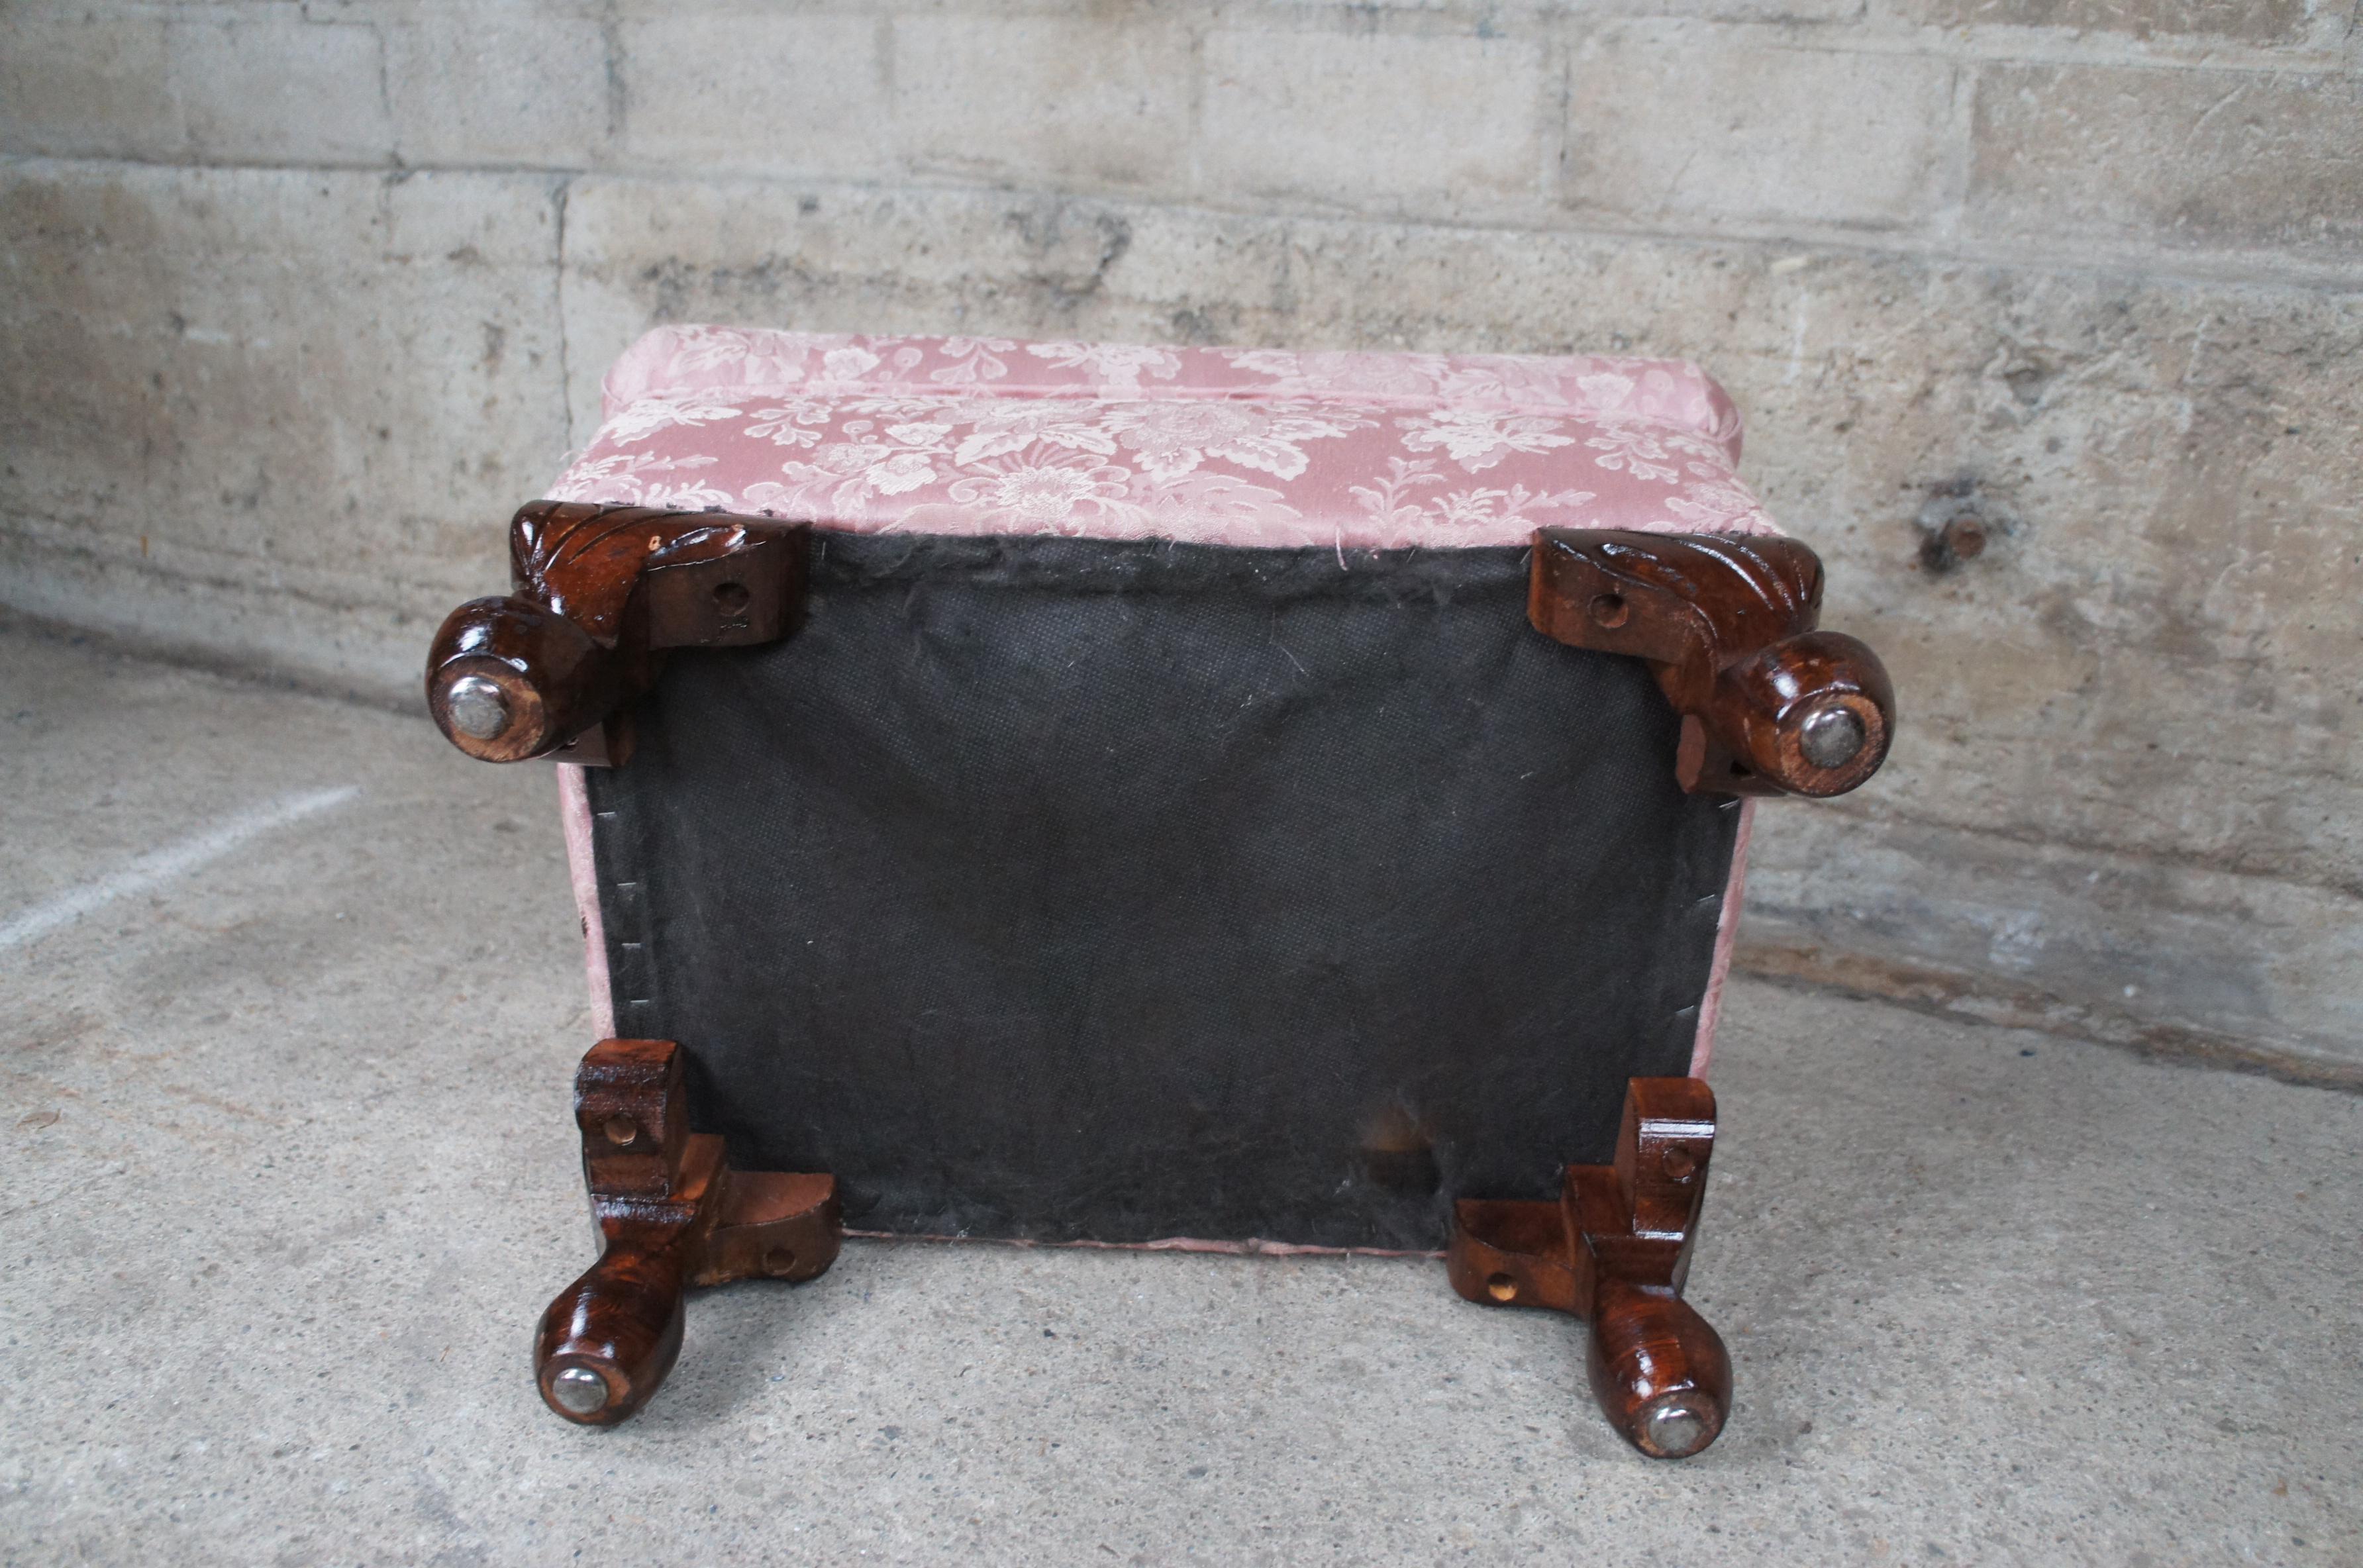 Vintage Queen Anne Floral Upholstered Walnut Ottoman Foot Stool Vanity Pouf Pink 2